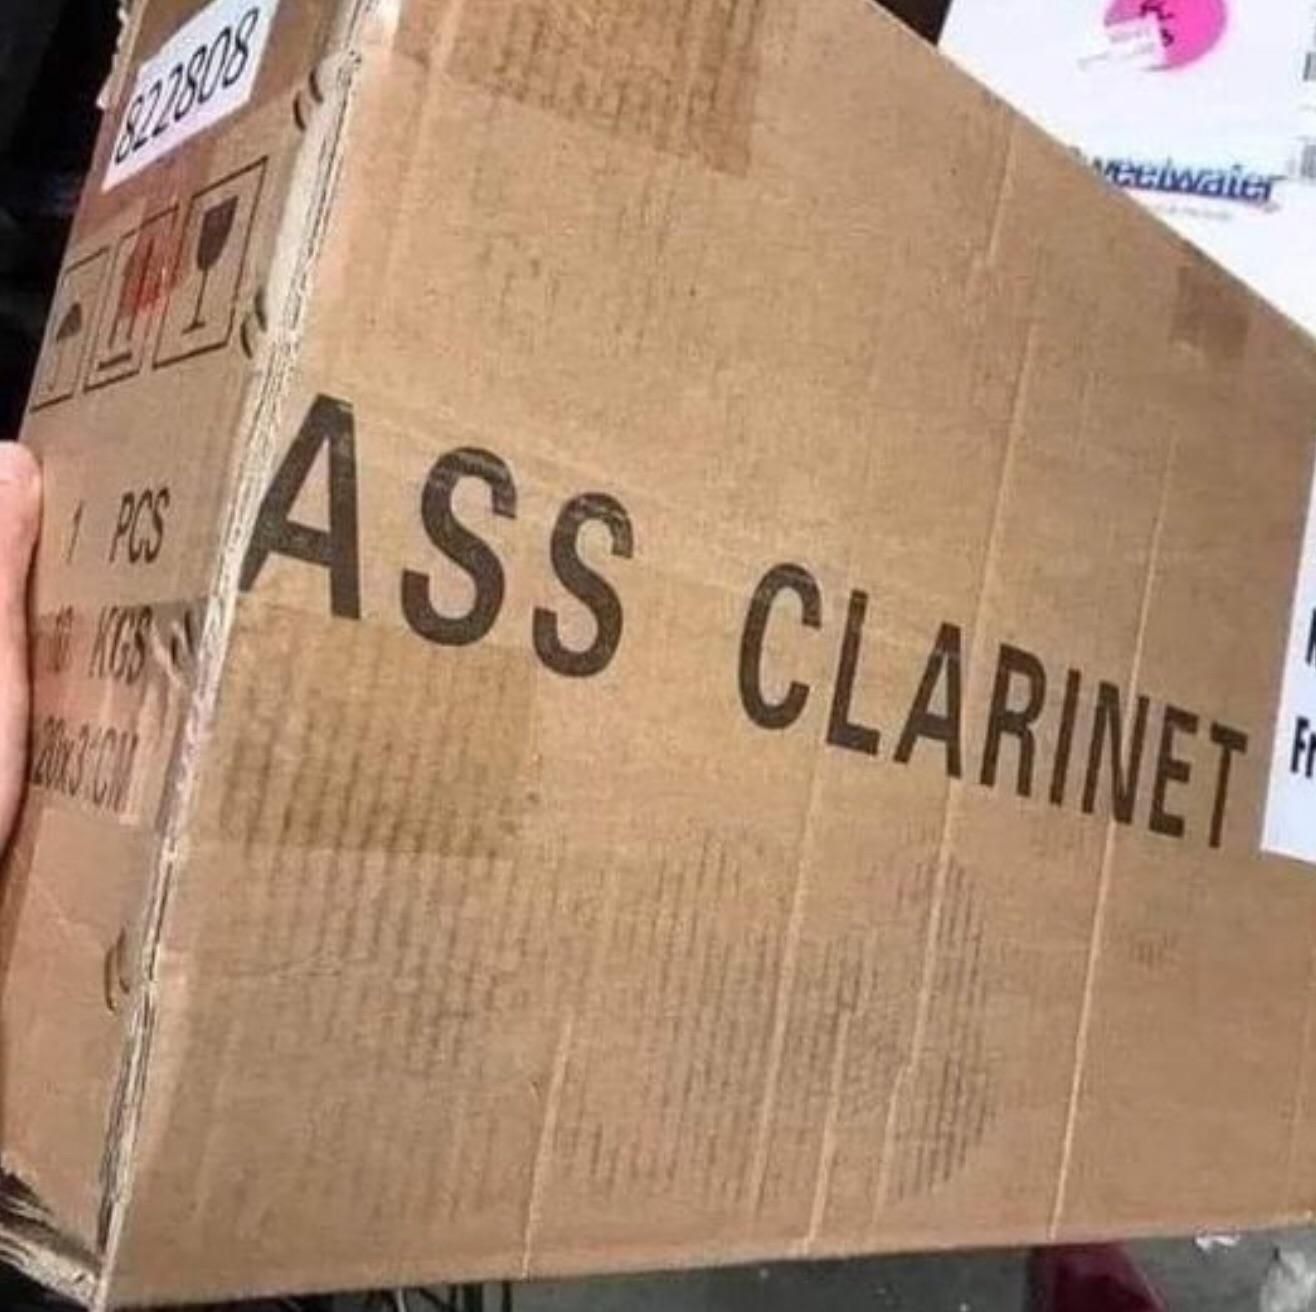 Ah yes my favourite kind of clarinet.